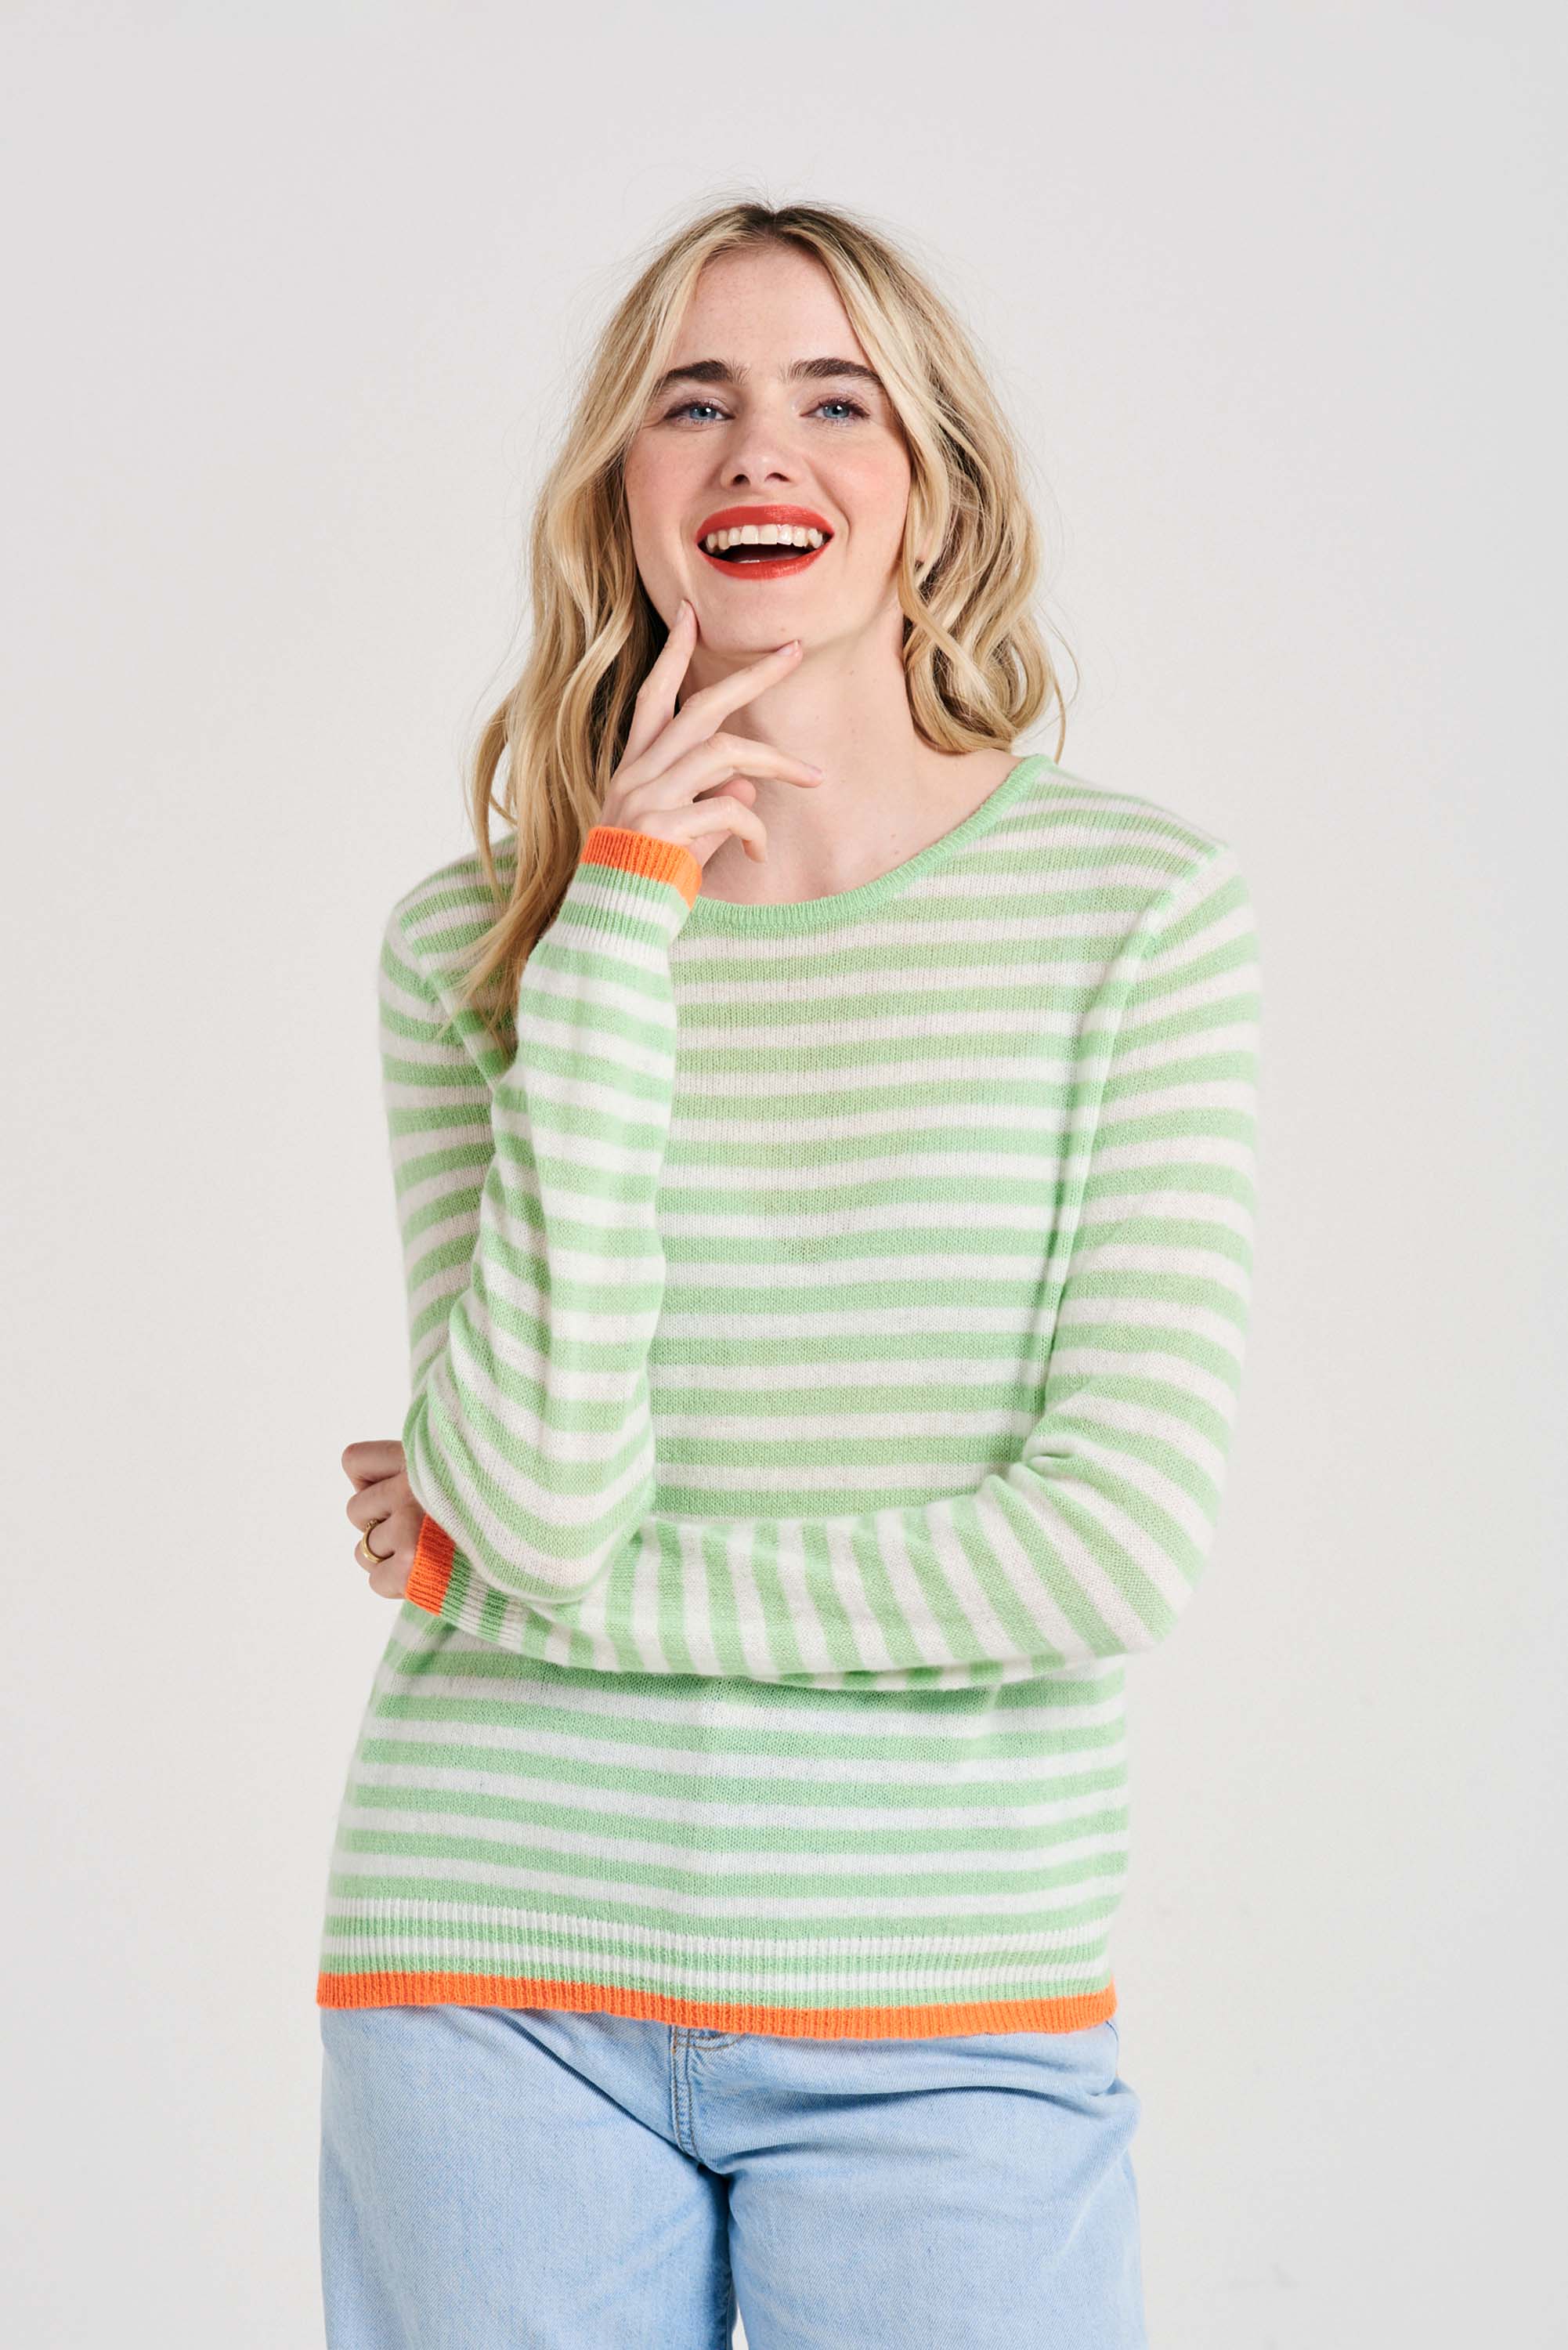 Blonde female model wearing Jumper1234 Little stripe cashmere crew neck jumper in lime green and cream, with neon orange tipped ribs